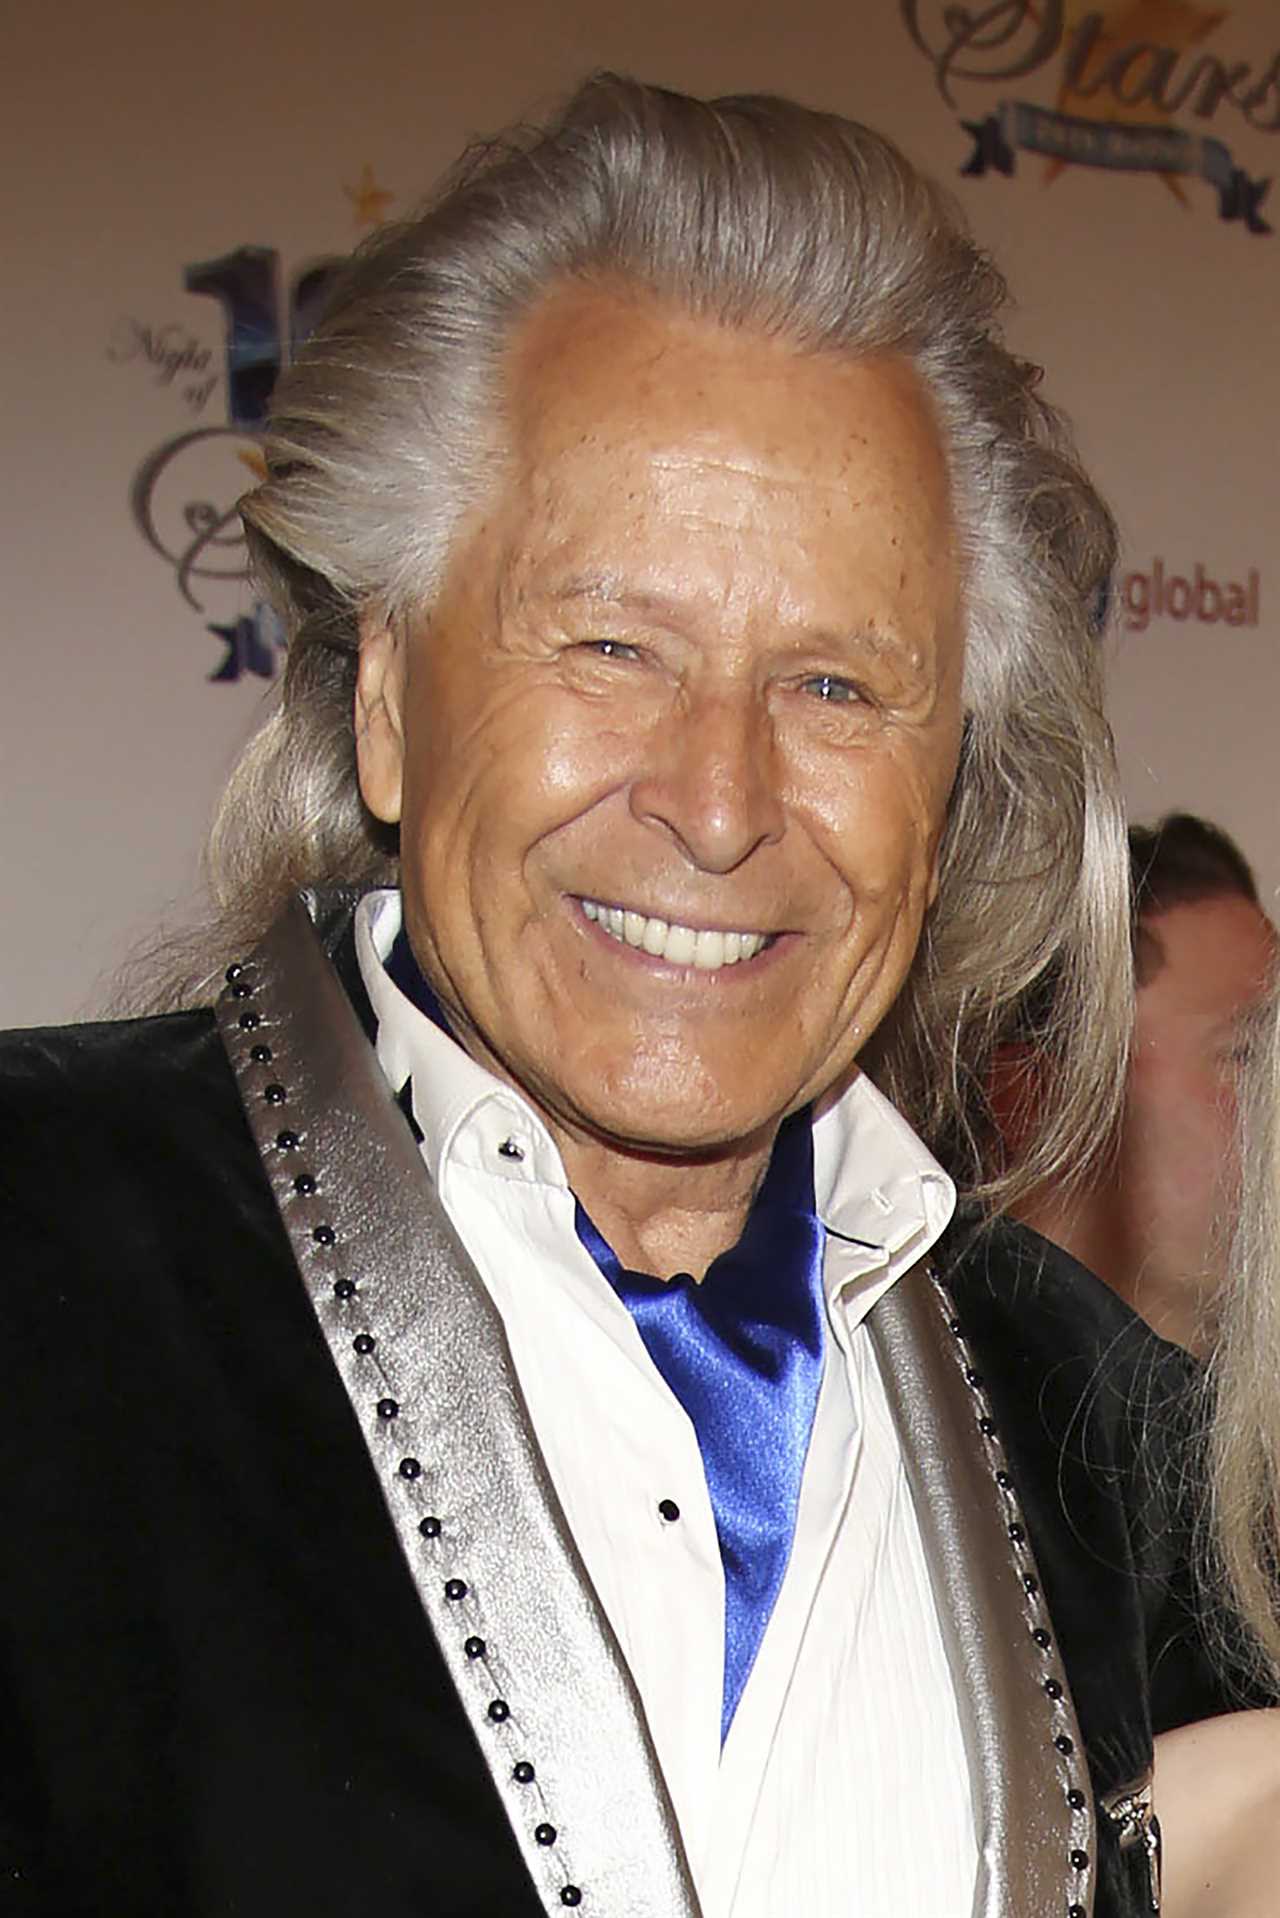 Prince Andrew's Friend Peter Nygard Found Guilty of Sexually Assaulting Four Women